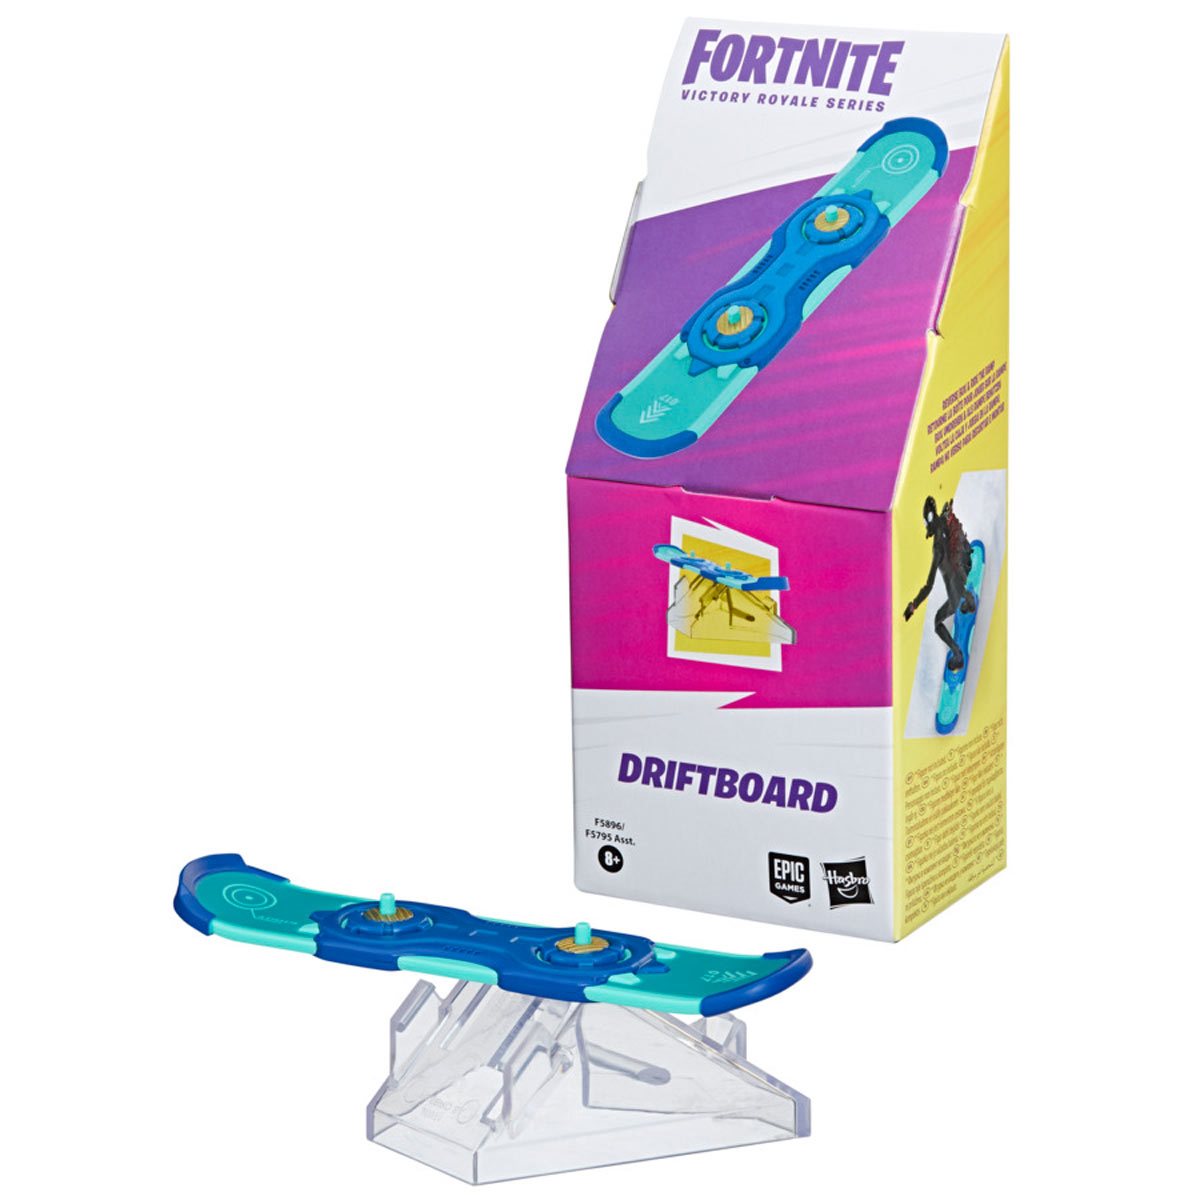 Fortnite Victory Royale Boards Collection Driftboard画像